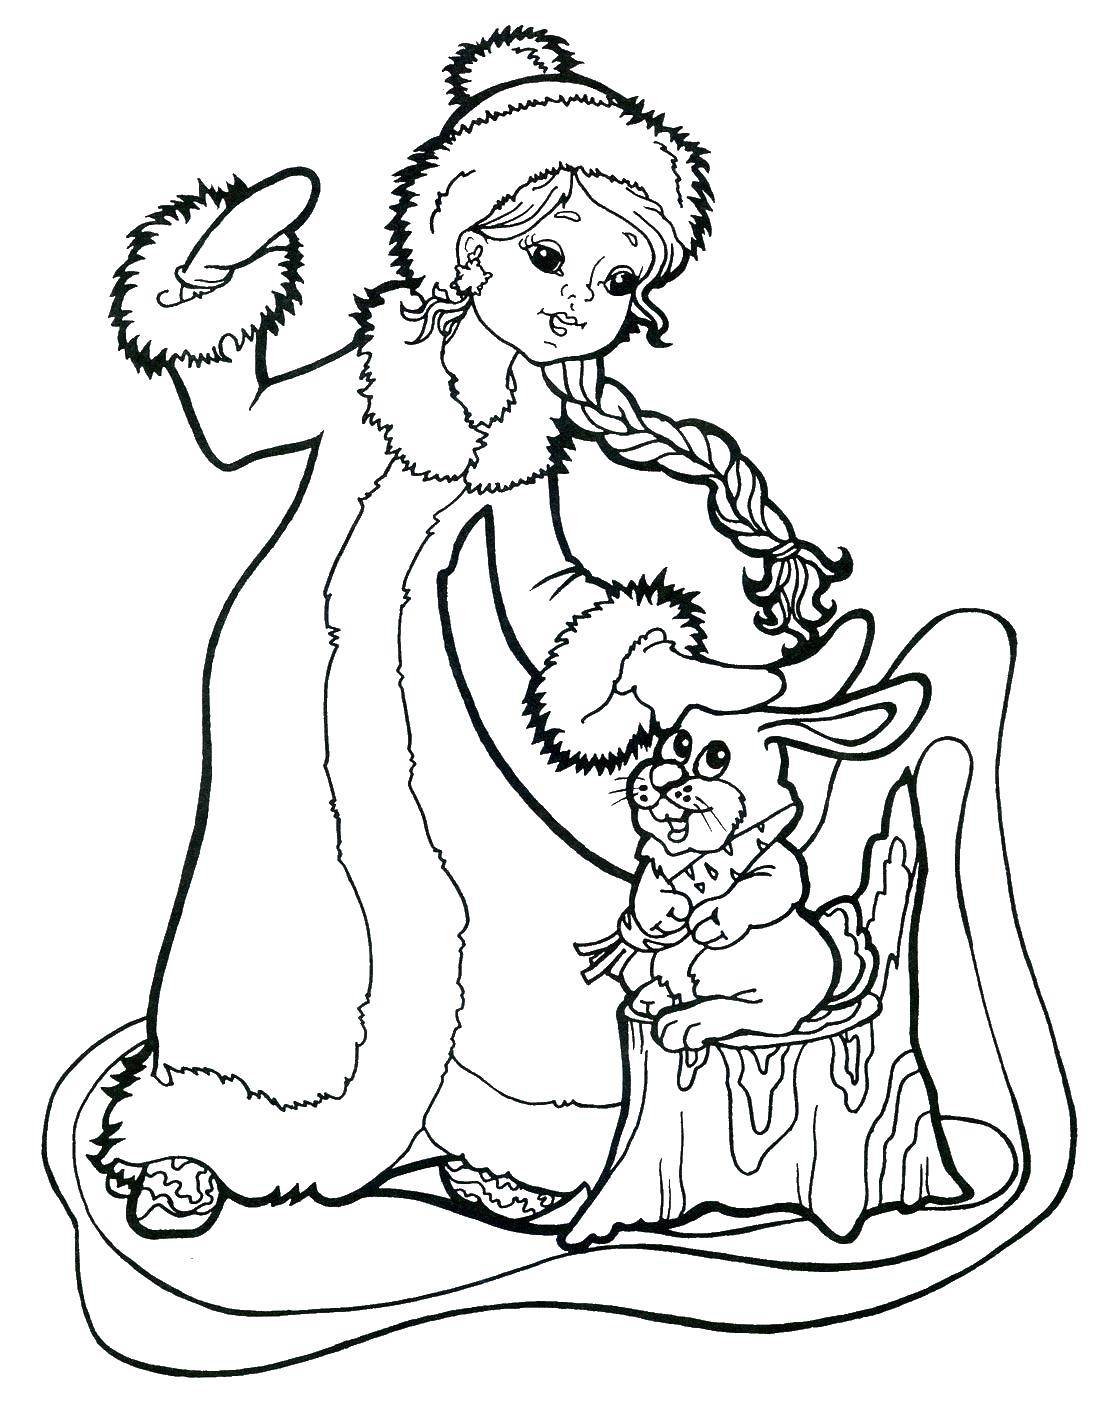 Coloring The snow maiden and Bunny. Category the tale of Snegurochka. Tags:  maiden, Bunny, carrot.